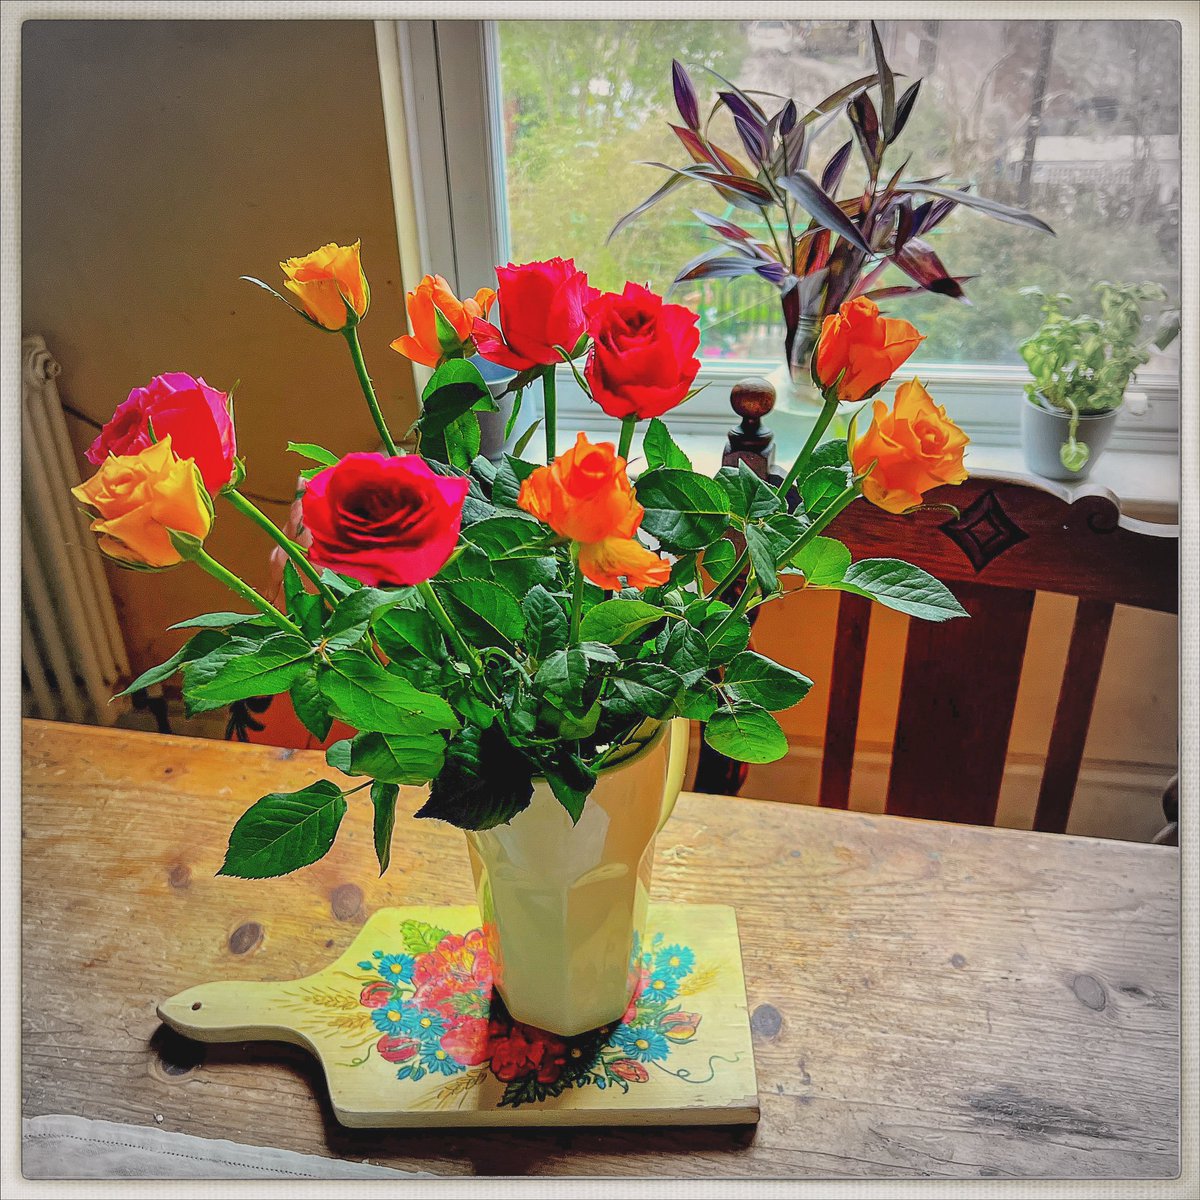 Day 112/366 #photoaday I love having flowers in the kitchen. Here are today's beauties. #photooftheday #flowers